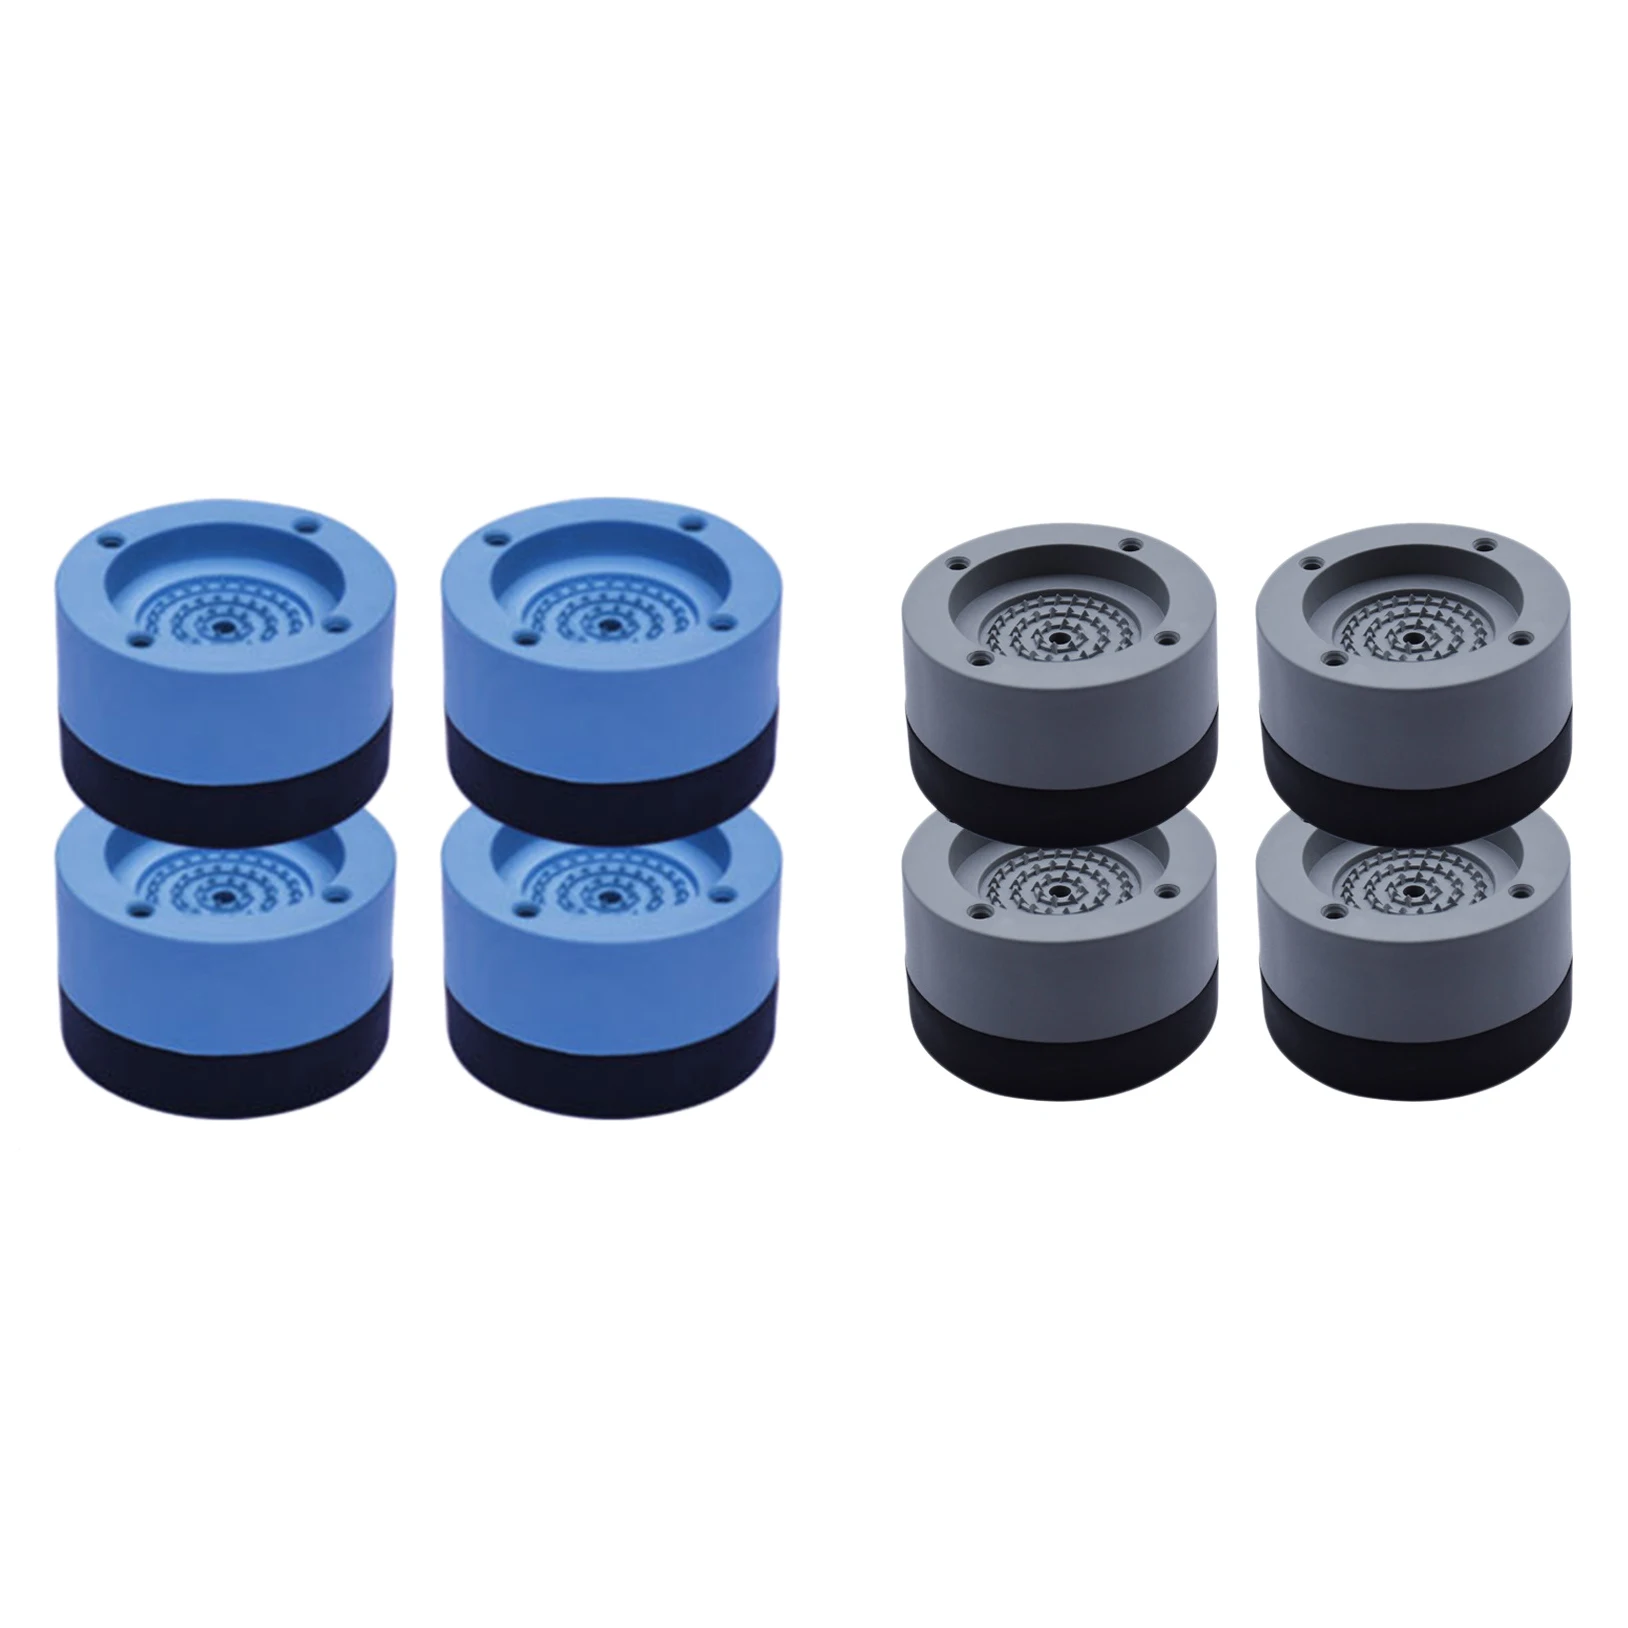 

4 Pcs/Set Anti-Vibration Pads Rubber Noise Reduction Vibration Anti-Walk Foot Mount for Washer and Dryer Adjustable Height Washi